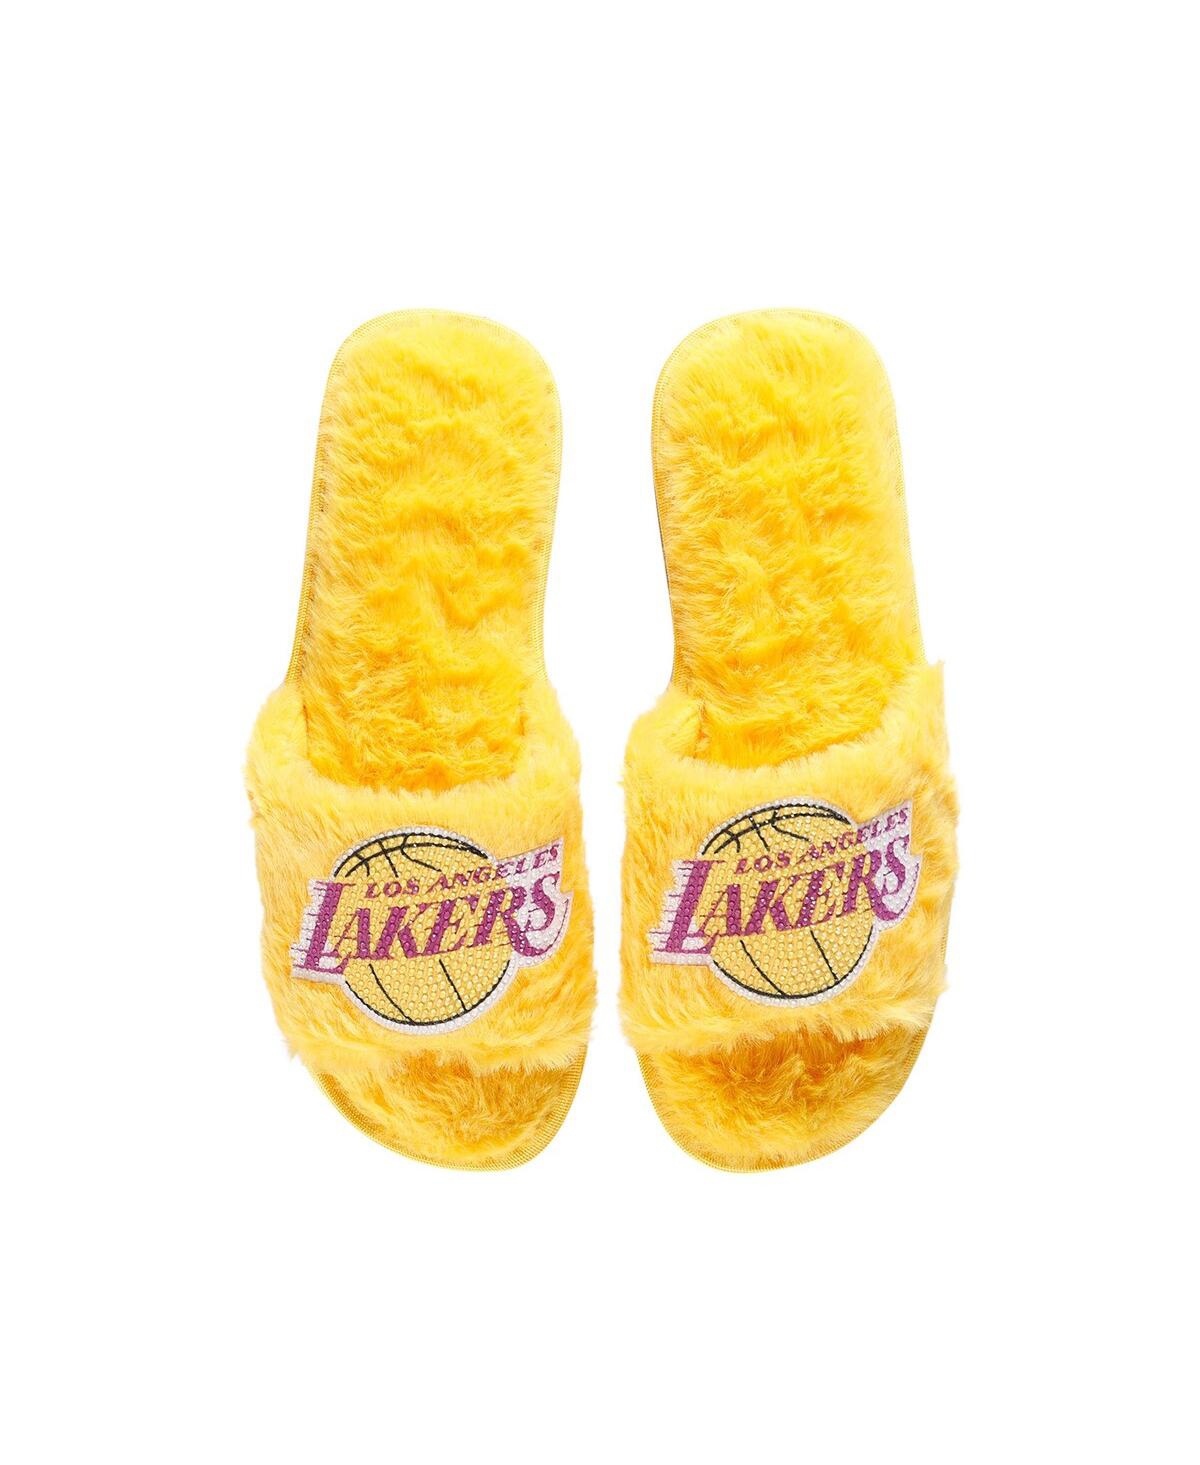 Women's Foco Gold Los Angeles Lakers Rhinestone Fuzzy Slippers - Gold